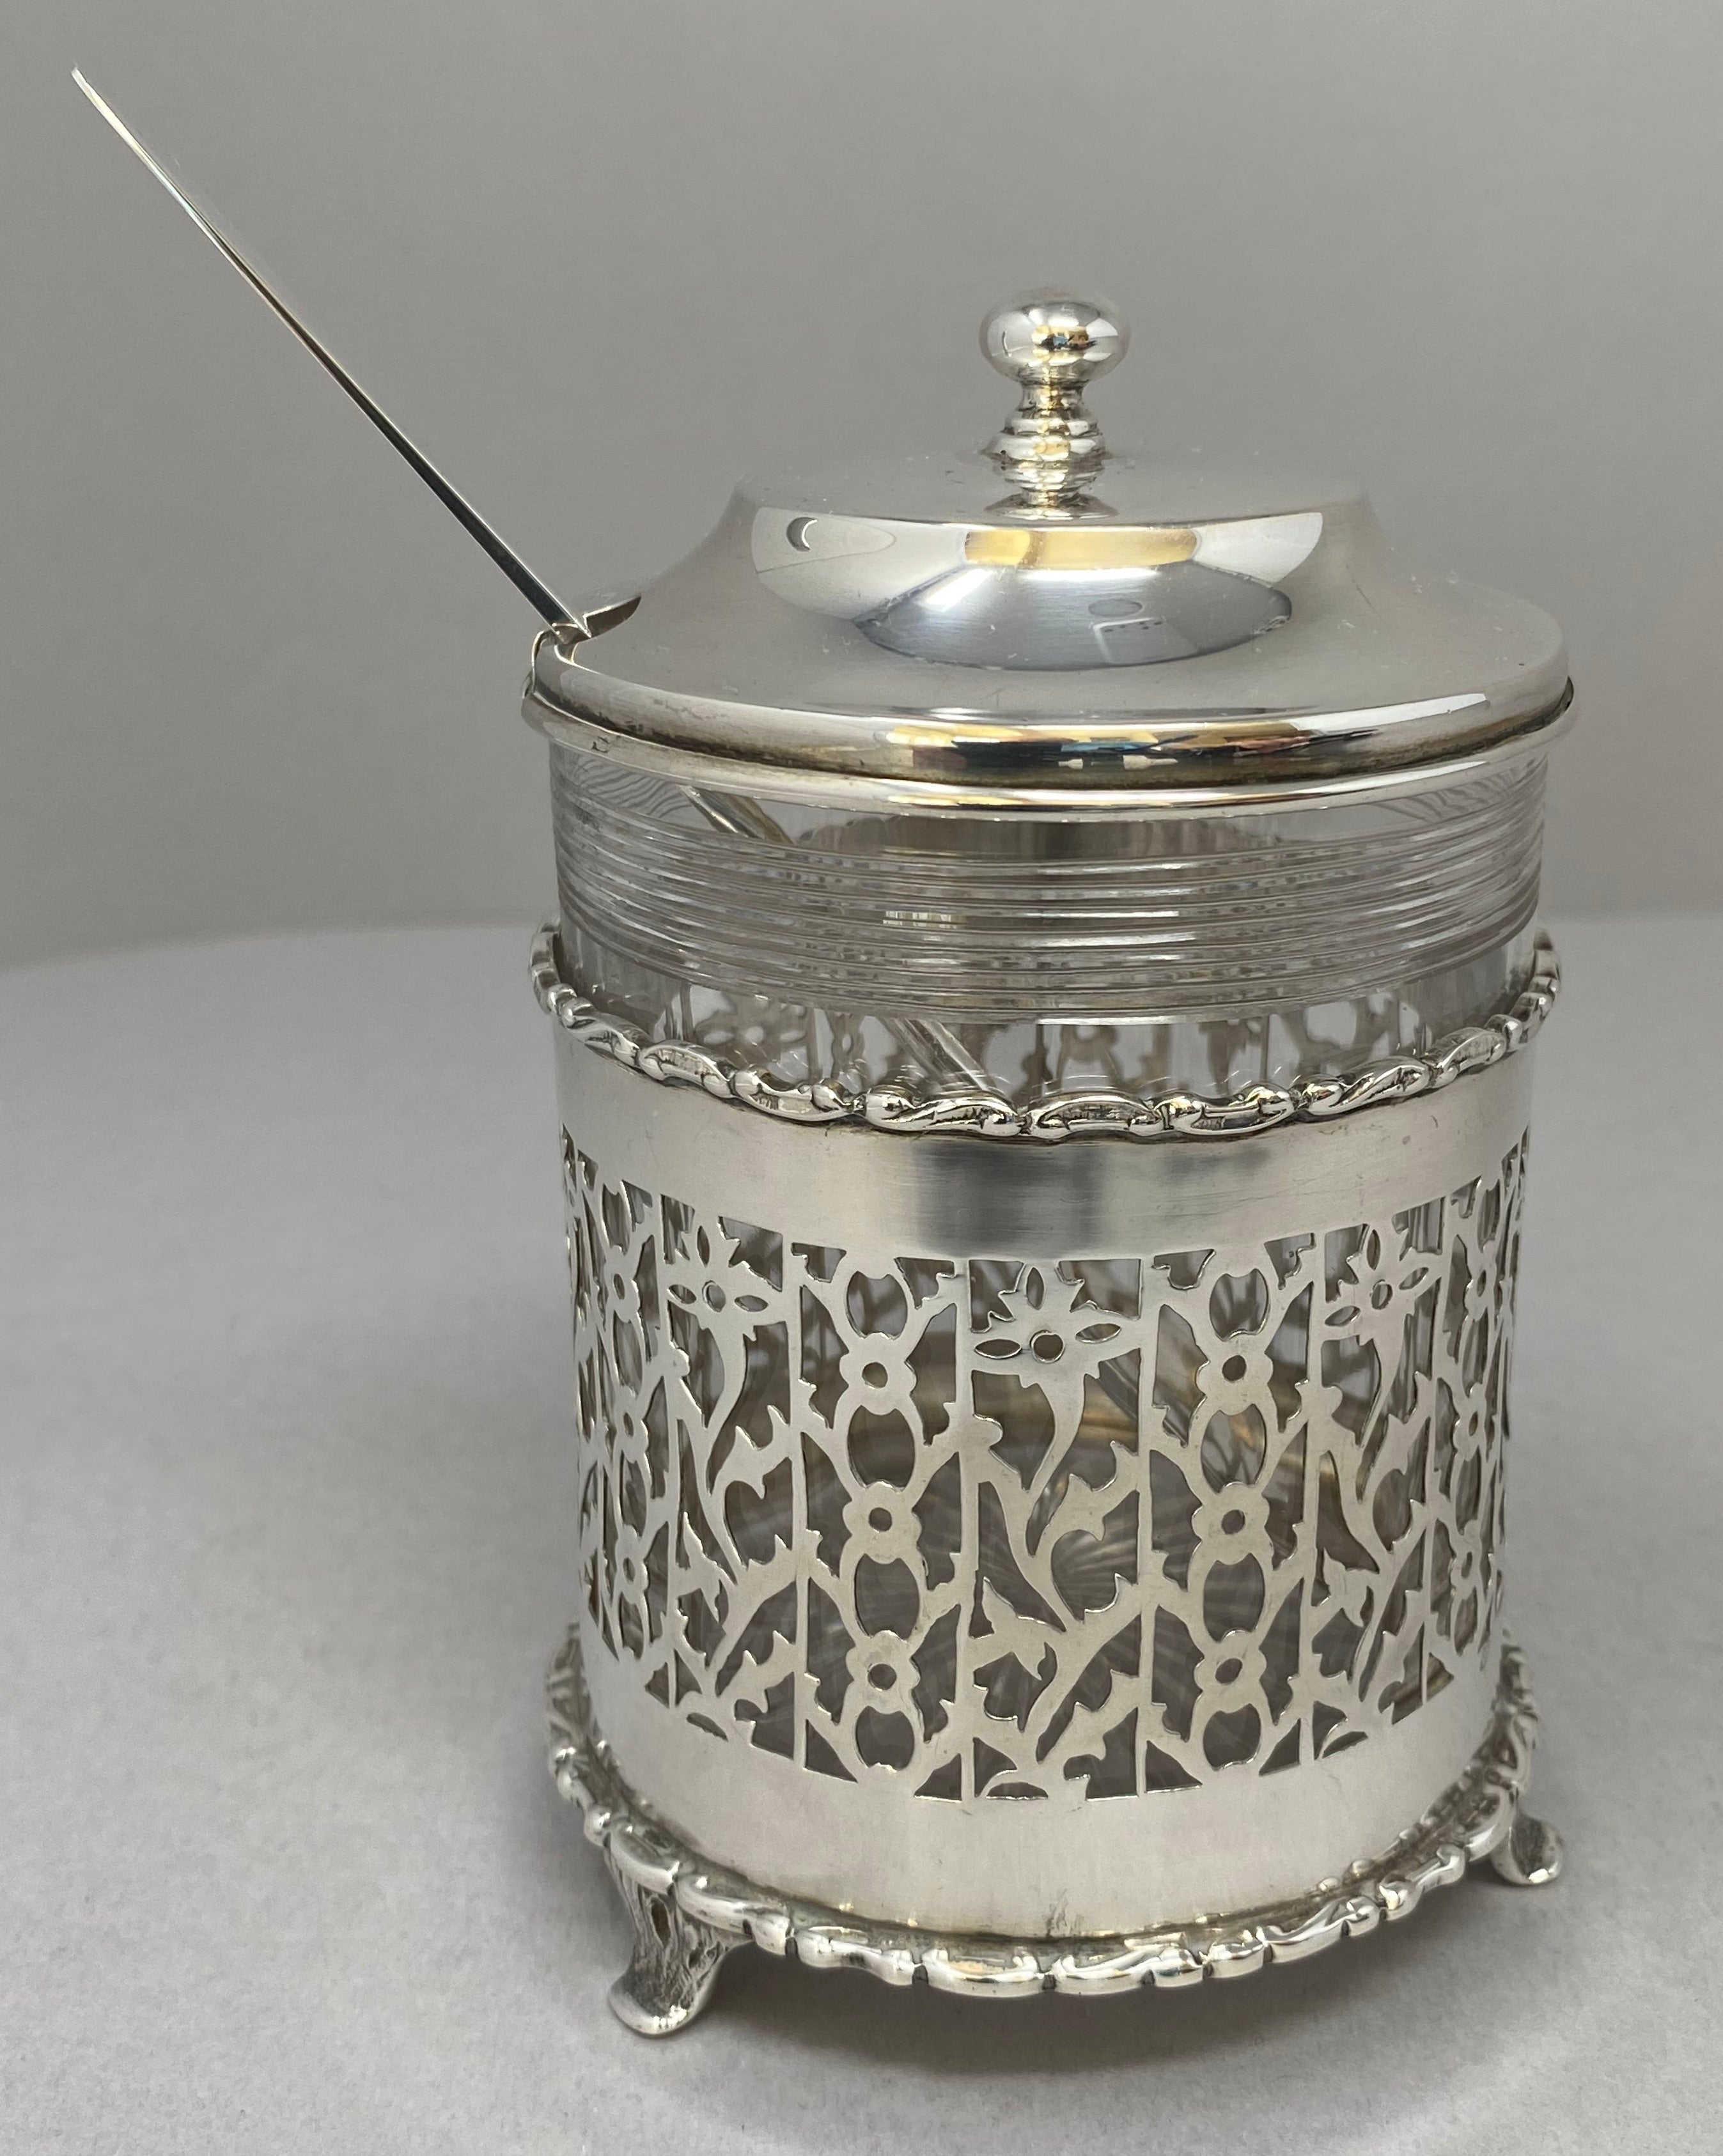 Antique Silver Preserve Jar with Spoon and Glass Liner